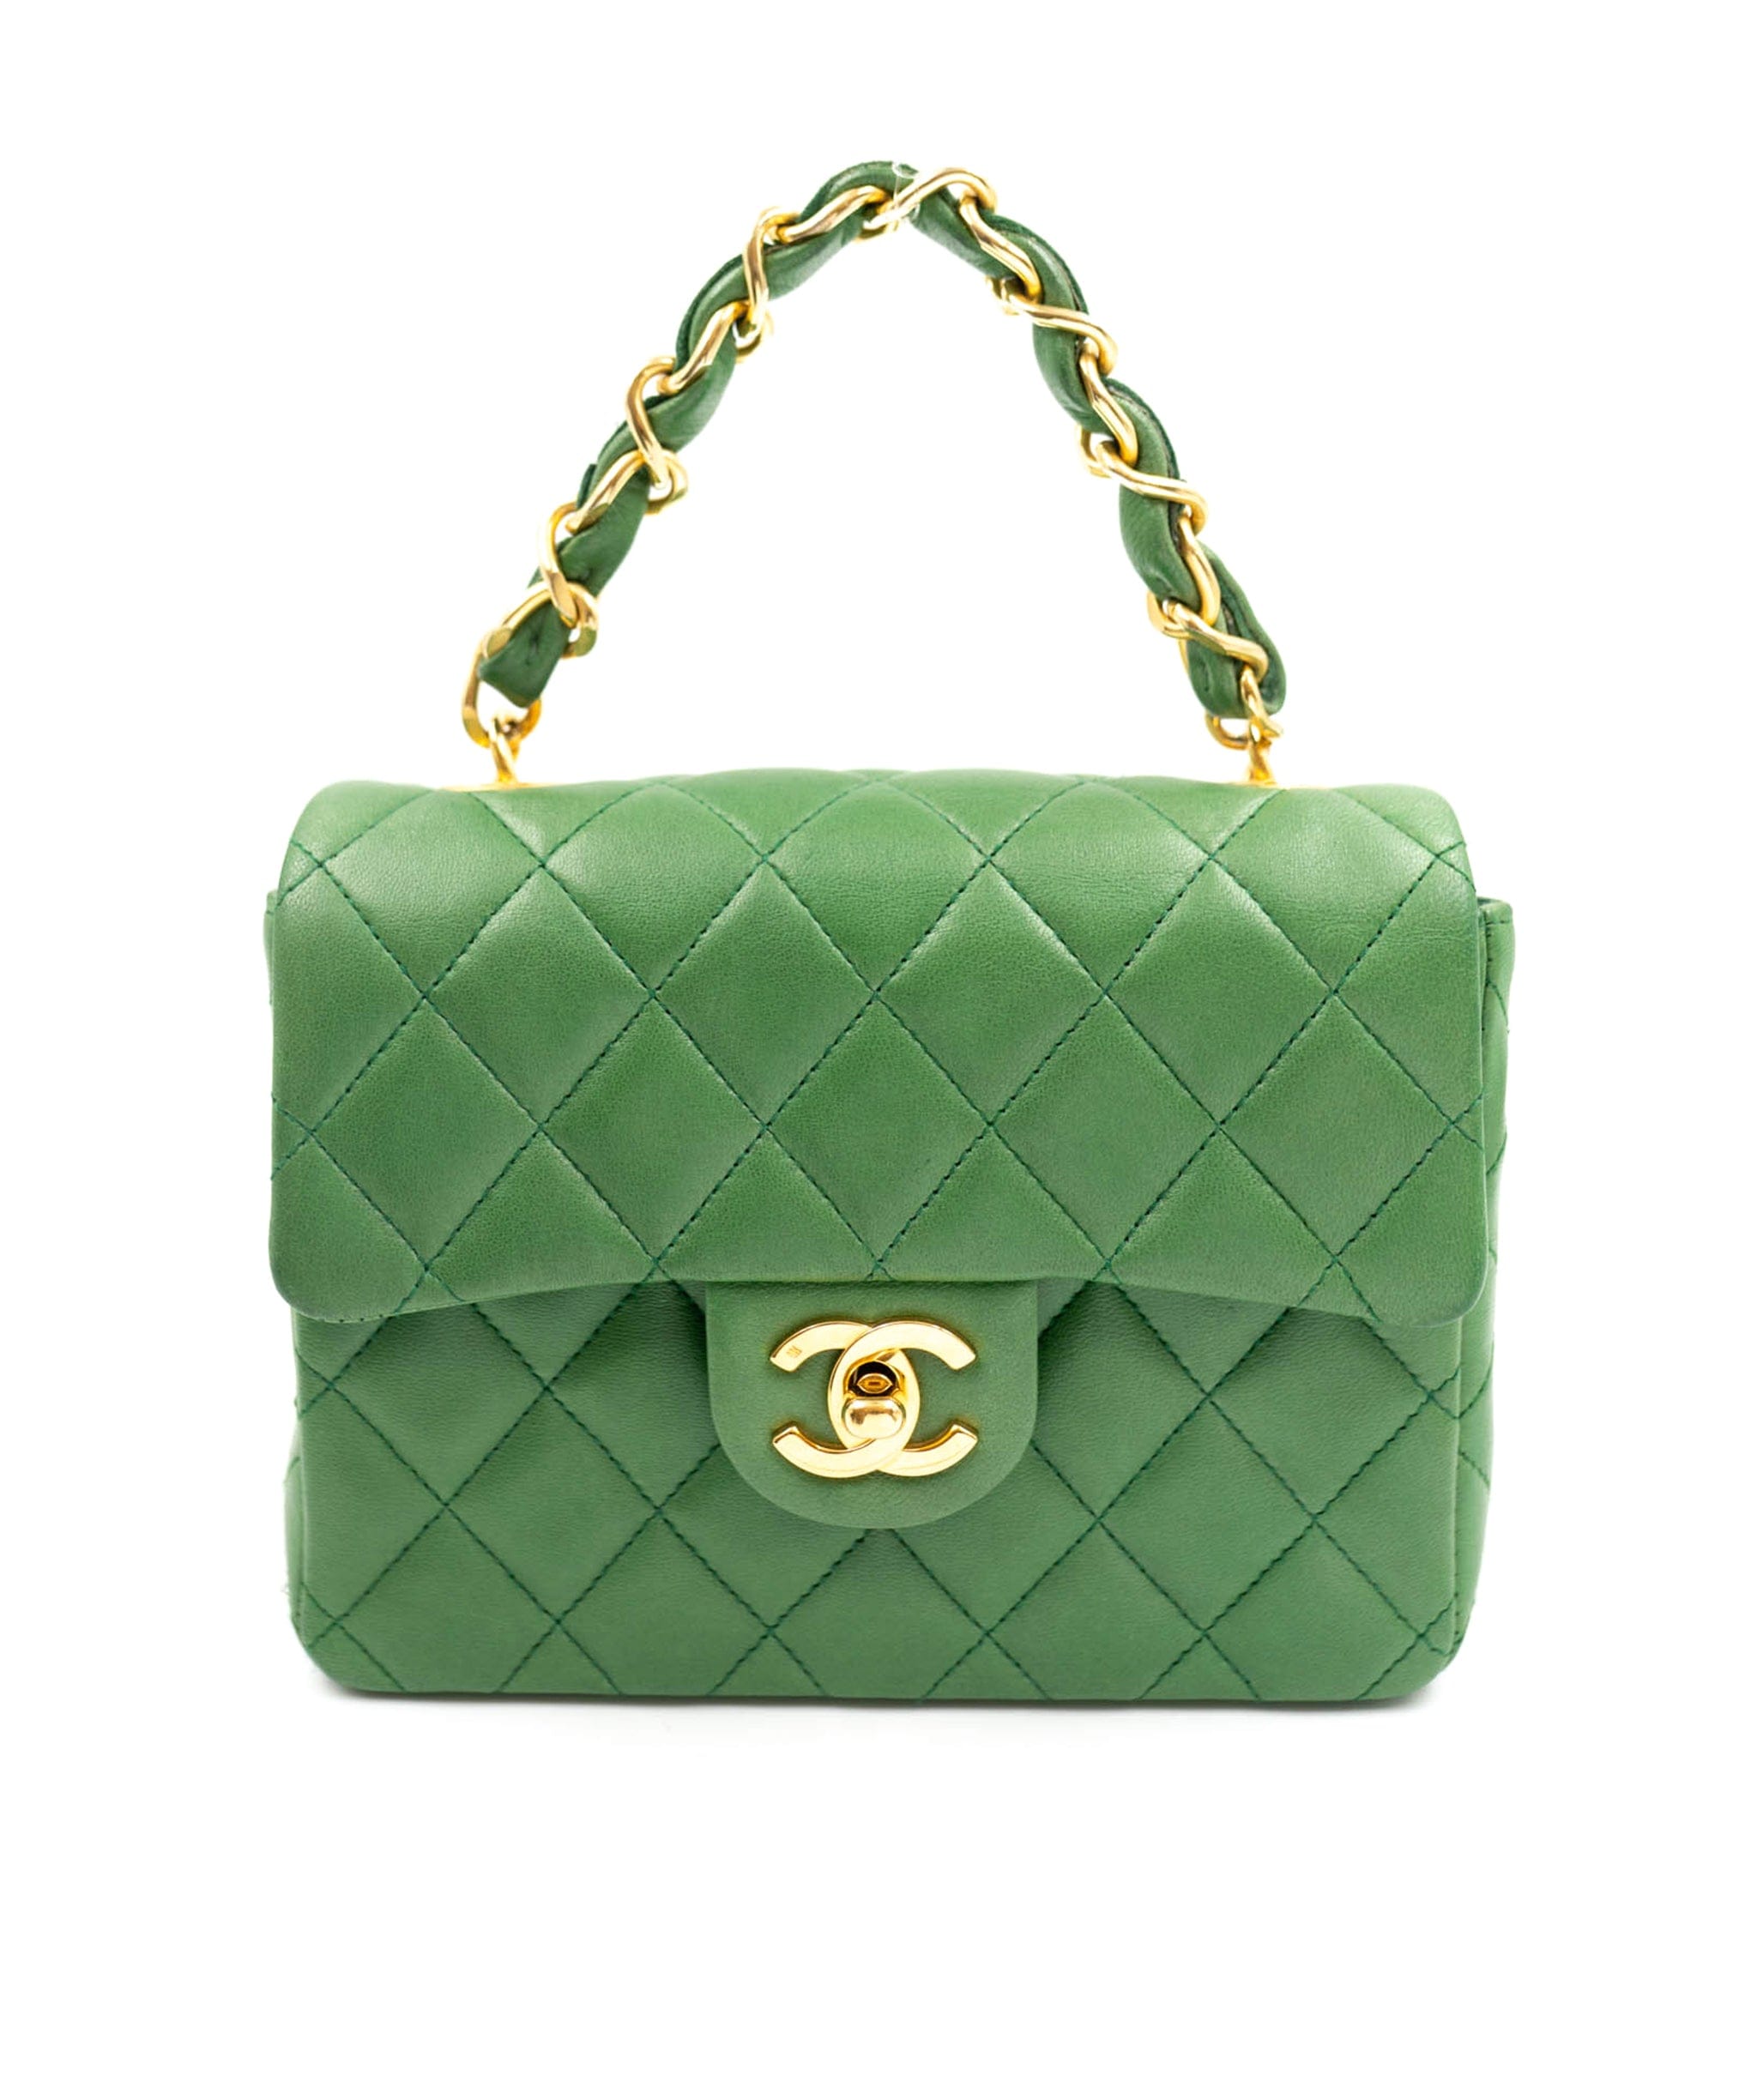 Chanel Rare Green 7 Mini Flap bag with GHW - Luxury Promise